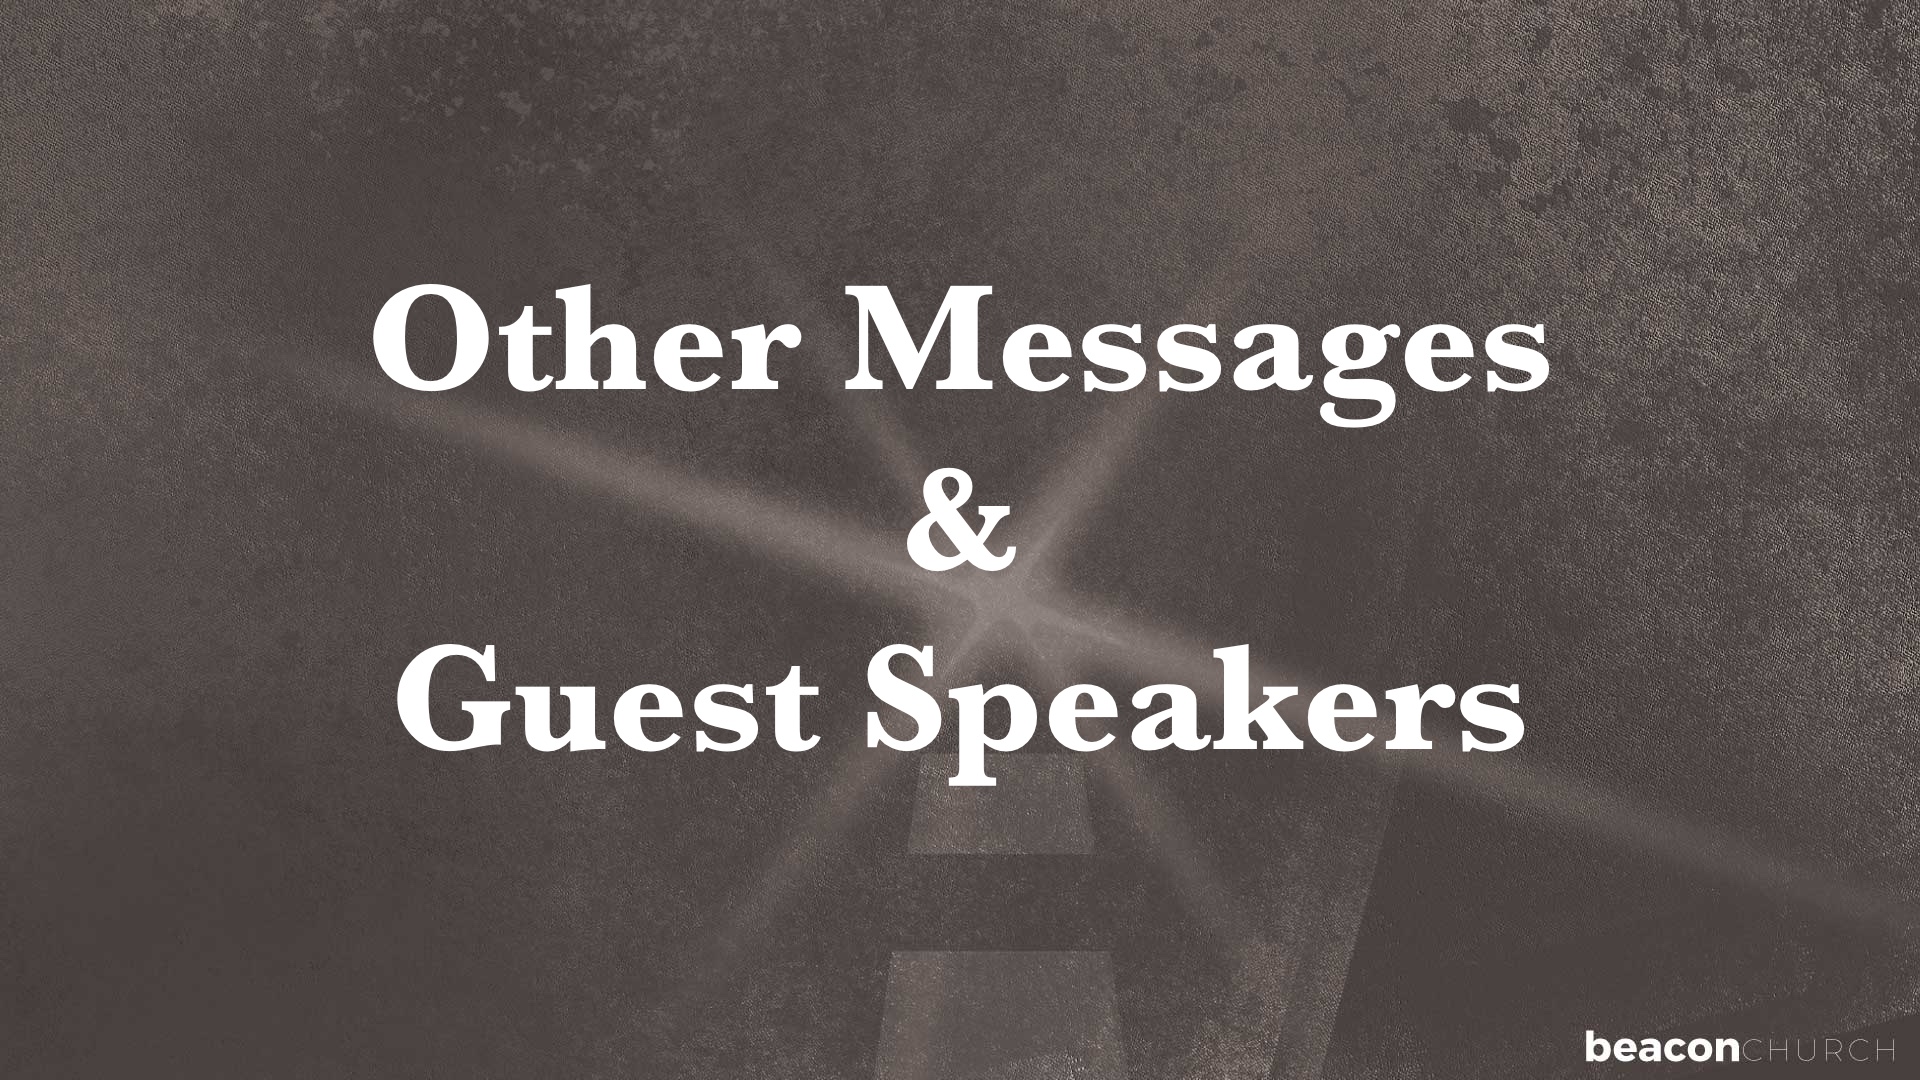 Other Messages & Guest Speakers banner